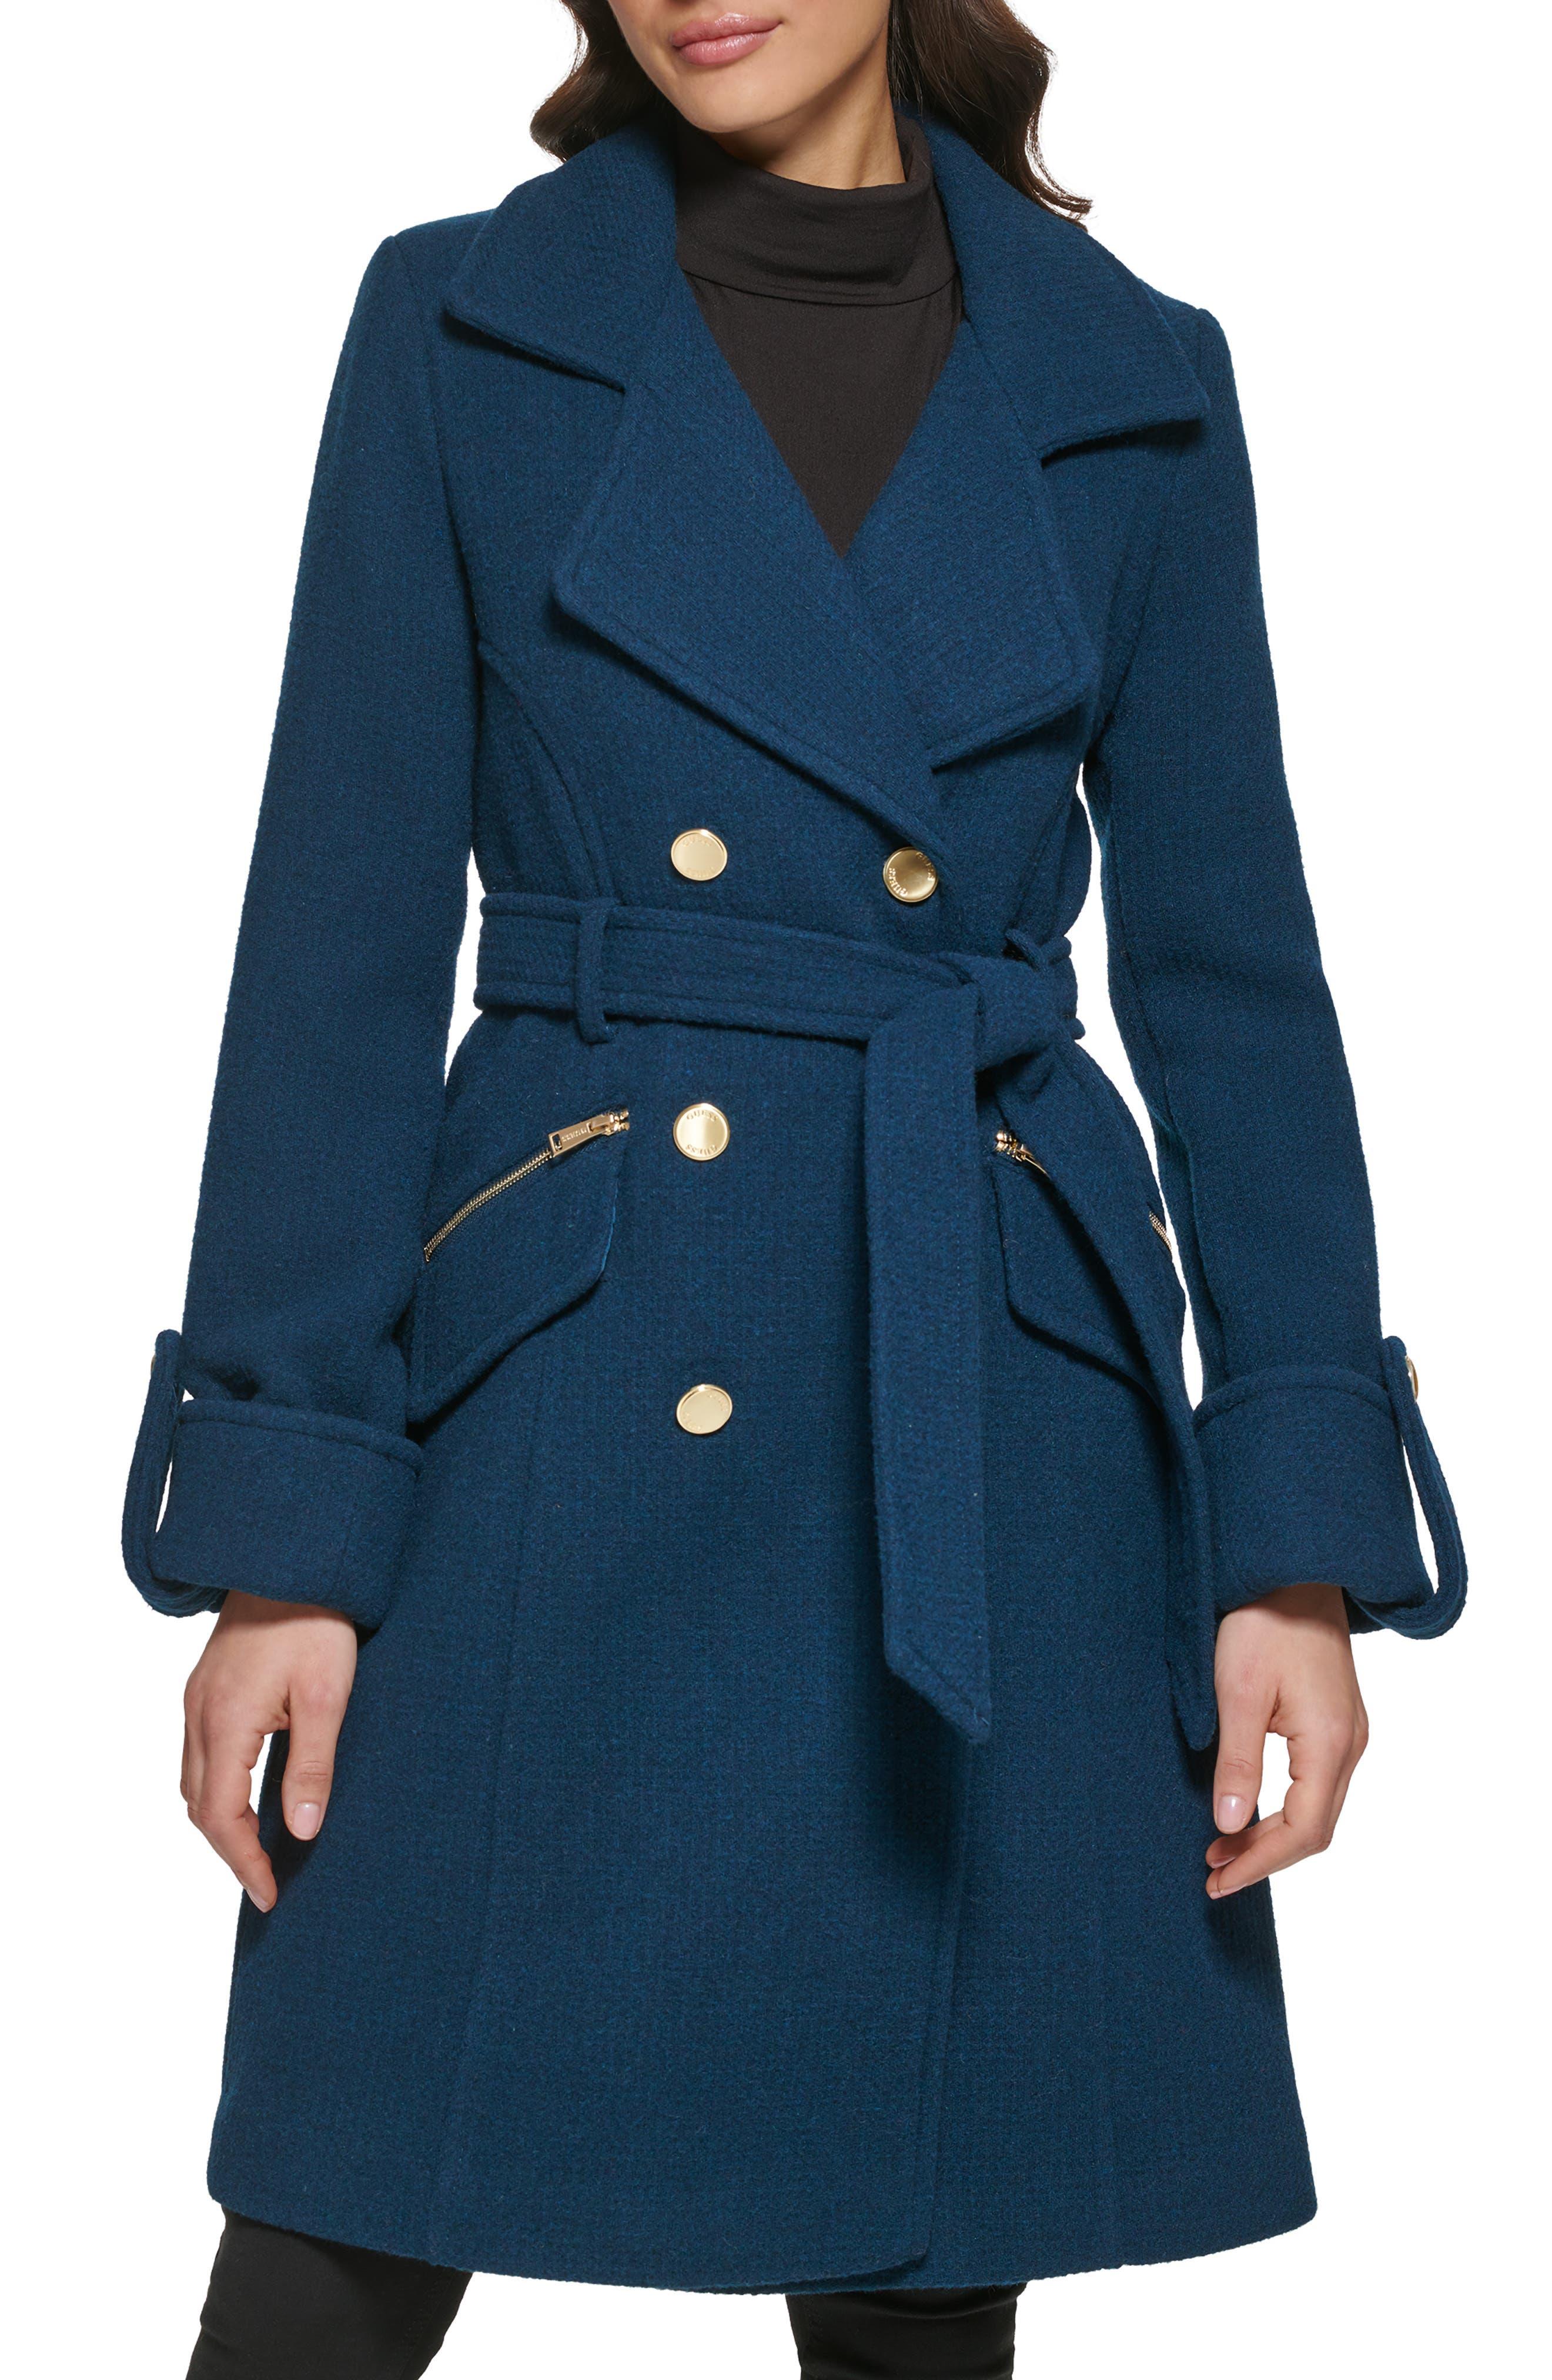 Guess Double Breasted Belted Wool Blend Coat in Blue | Lyst